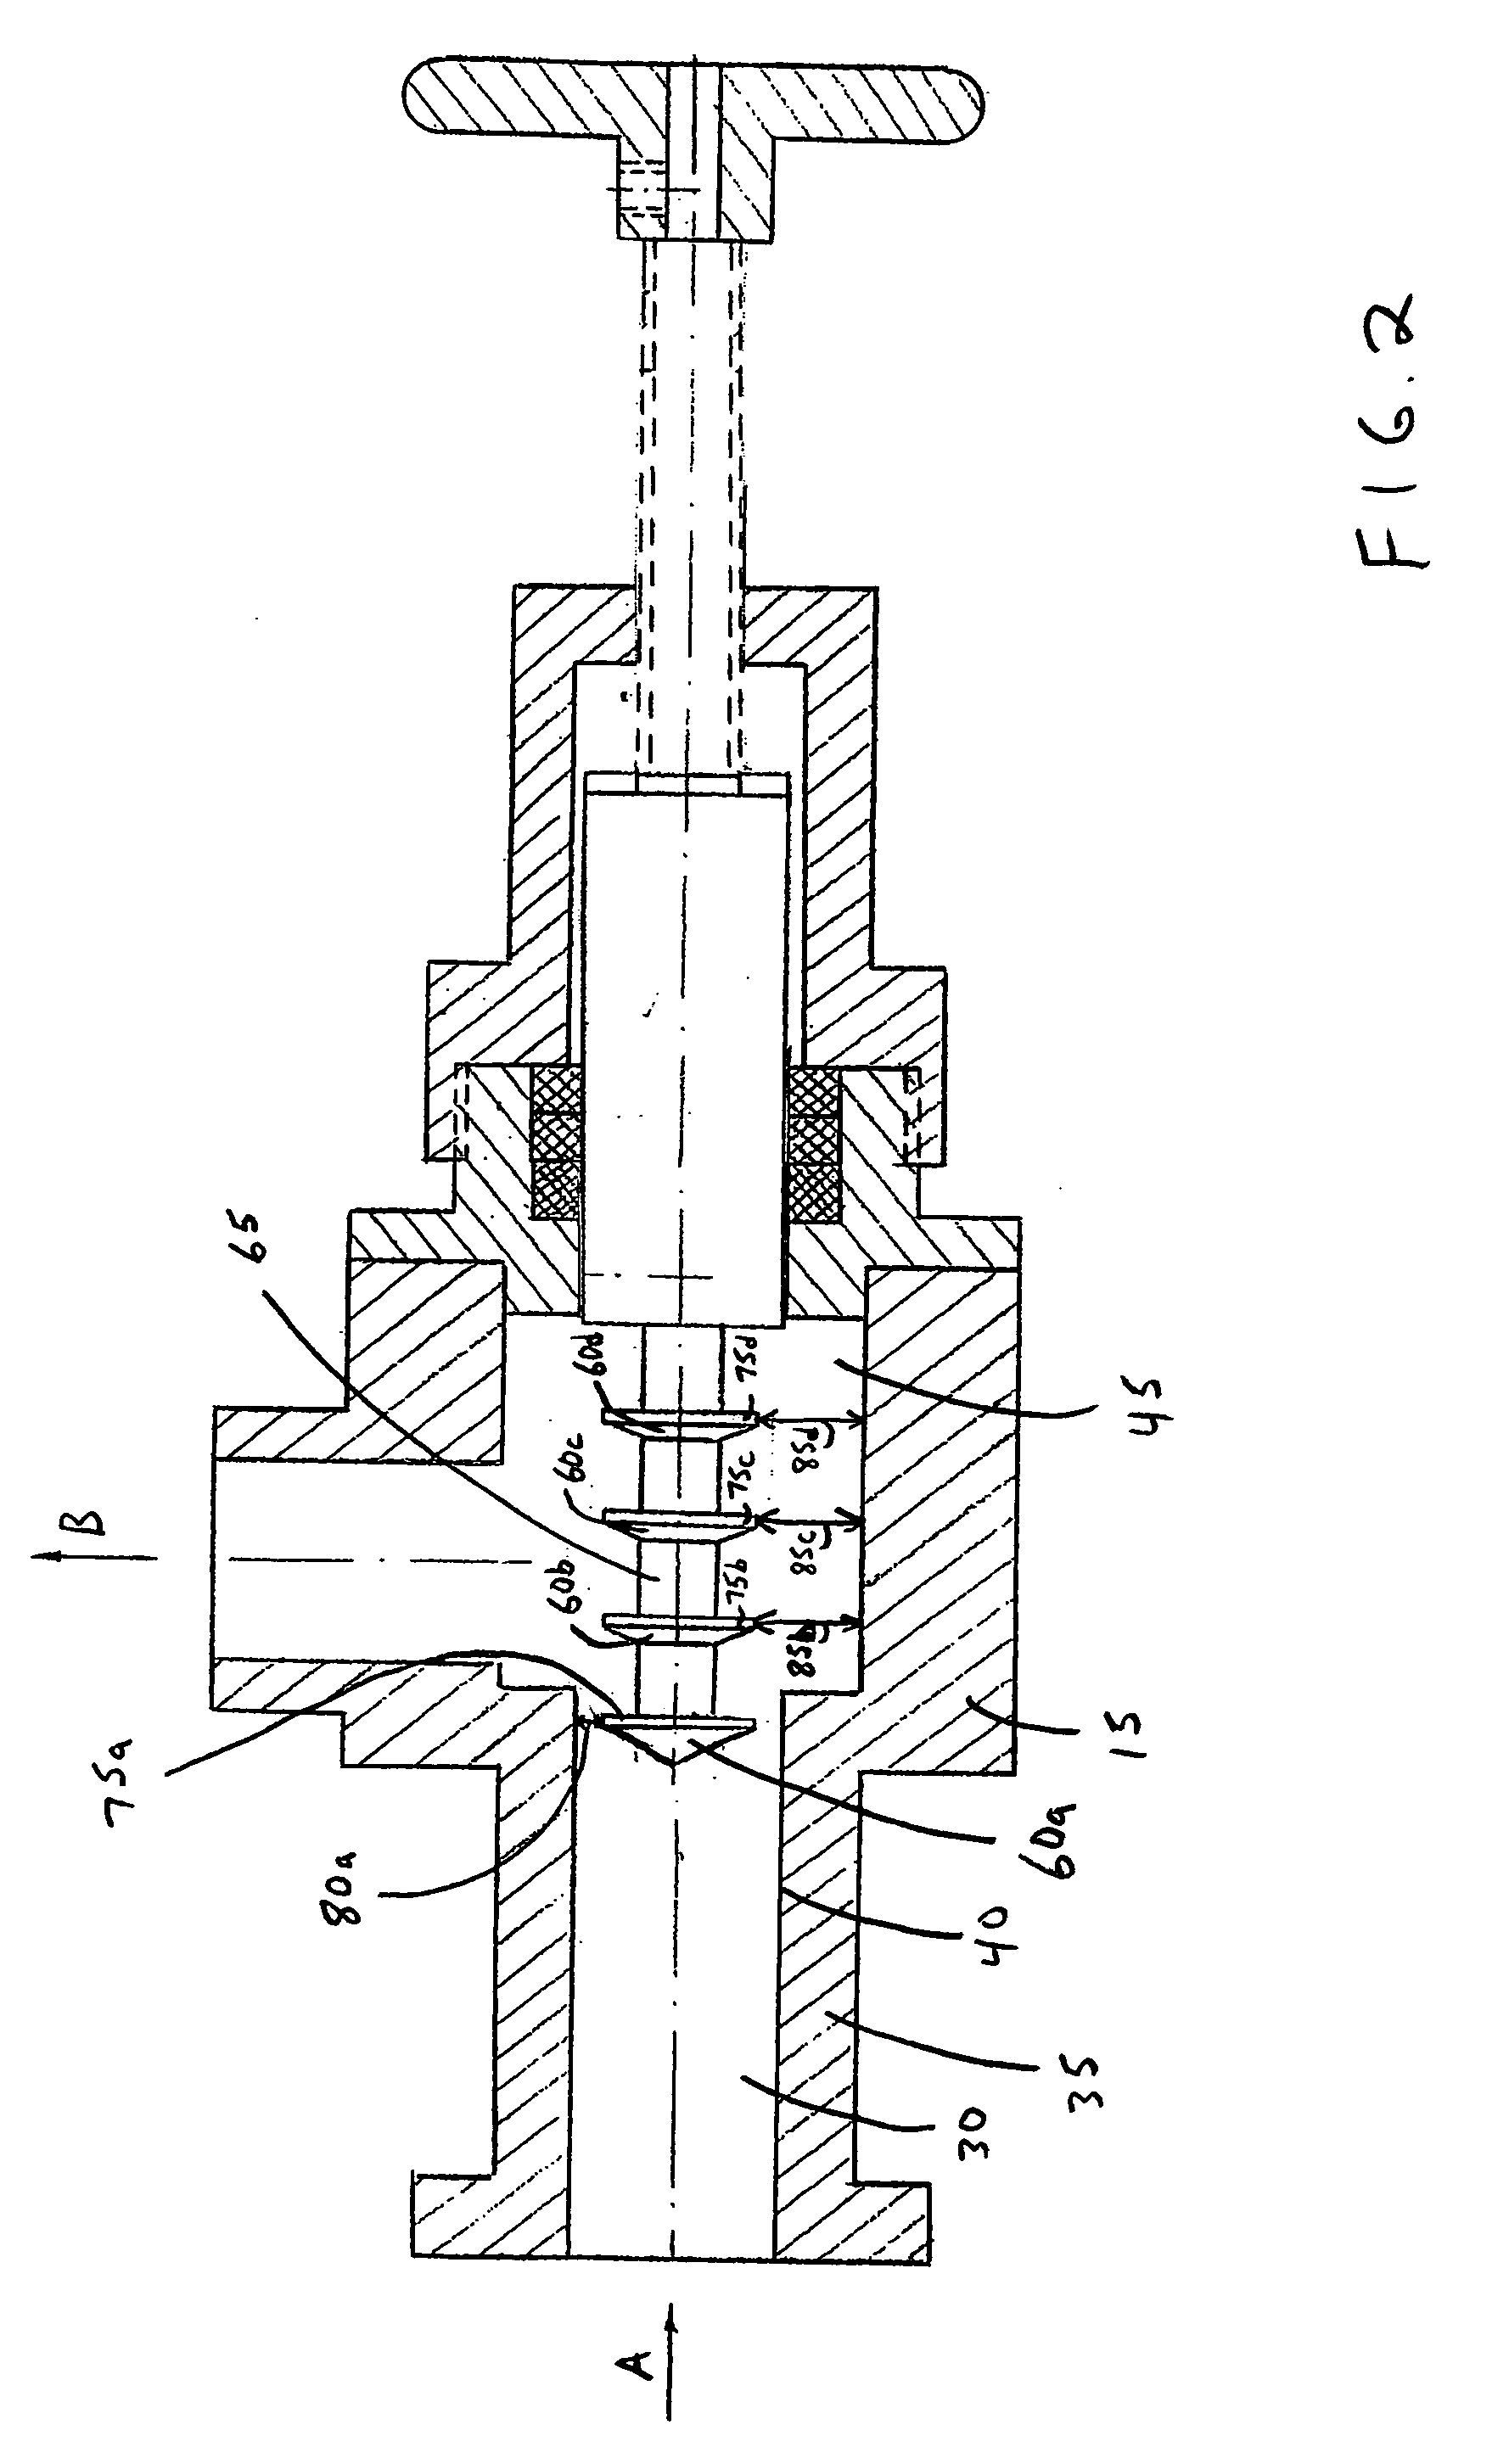 Device and method for creating hydrodynamic cavitation in fluids